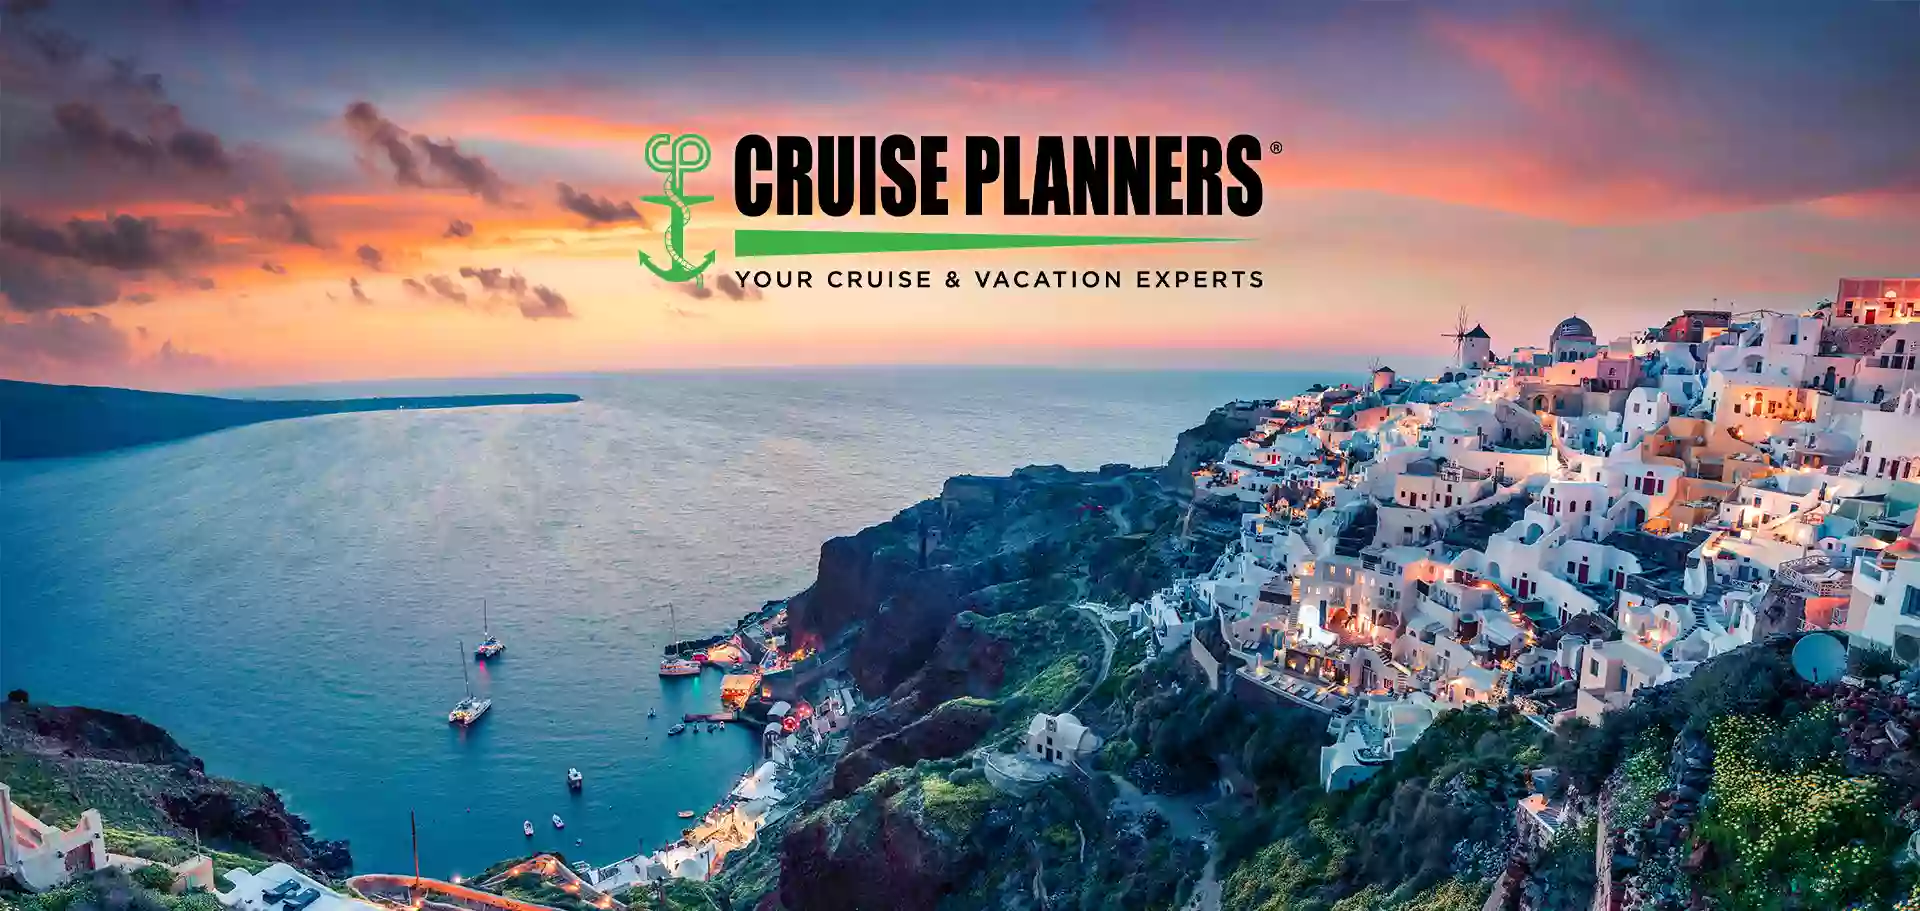 Lesley Bettis Travel - Cruise Planners